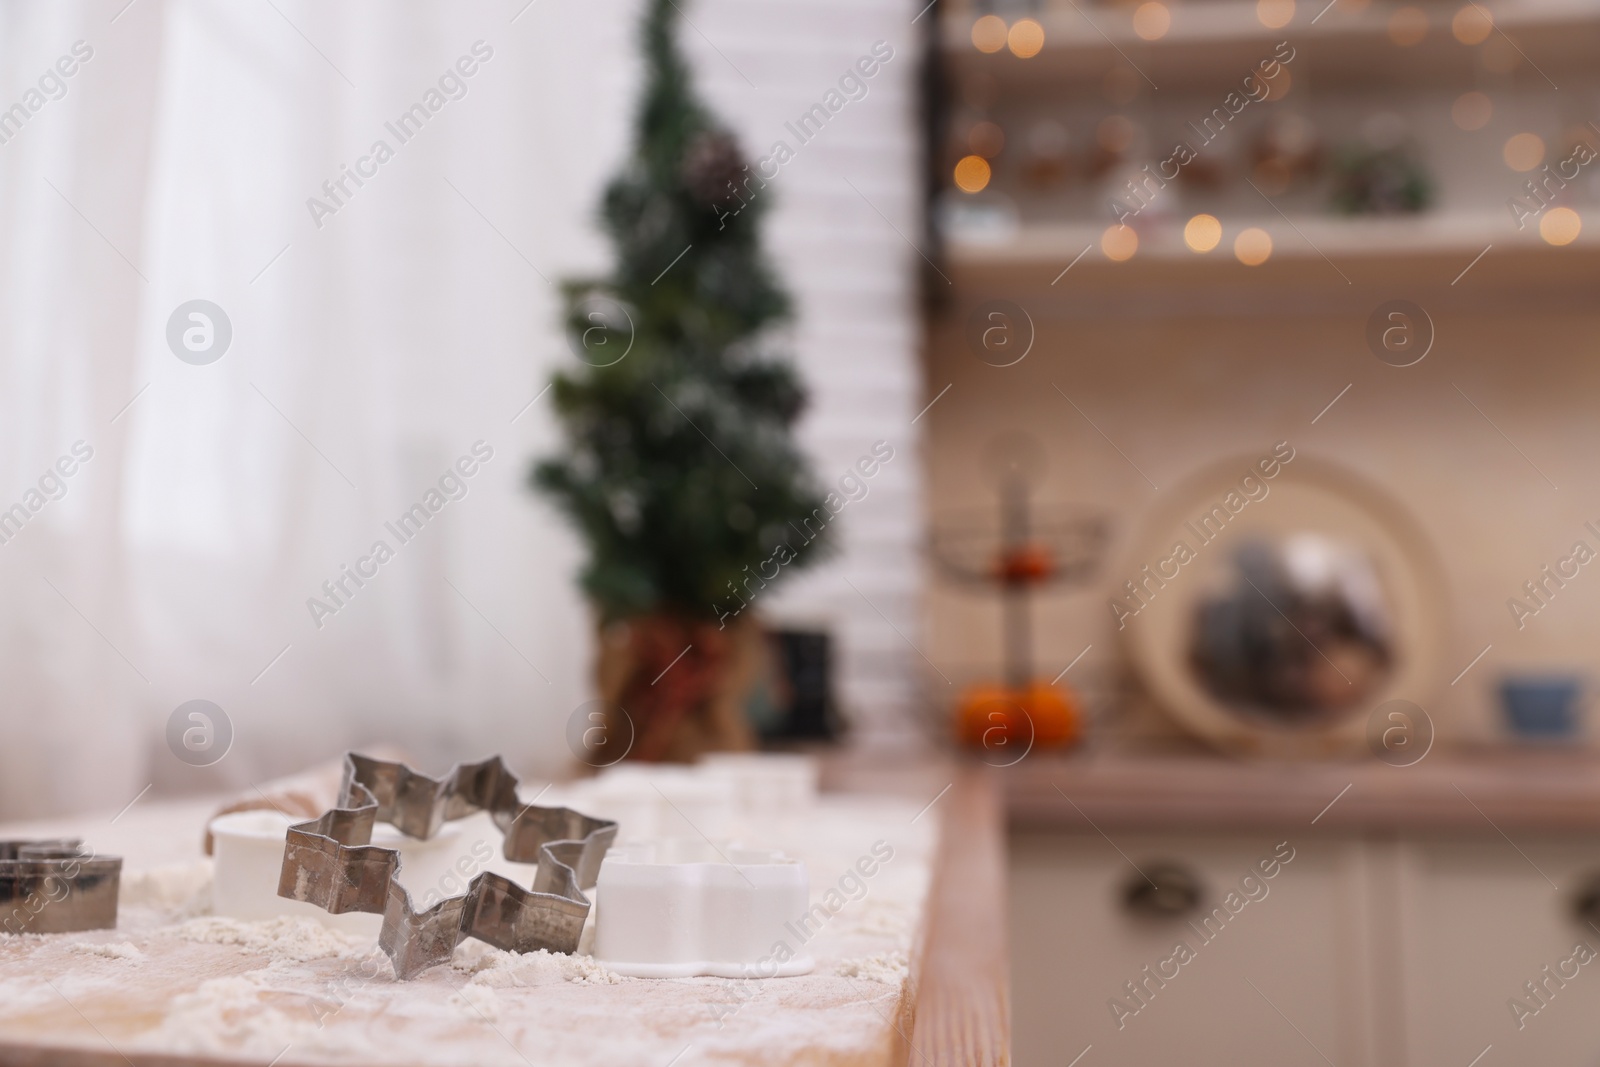 Photo of Cookie cutter on wooden table in kitchen, space for text